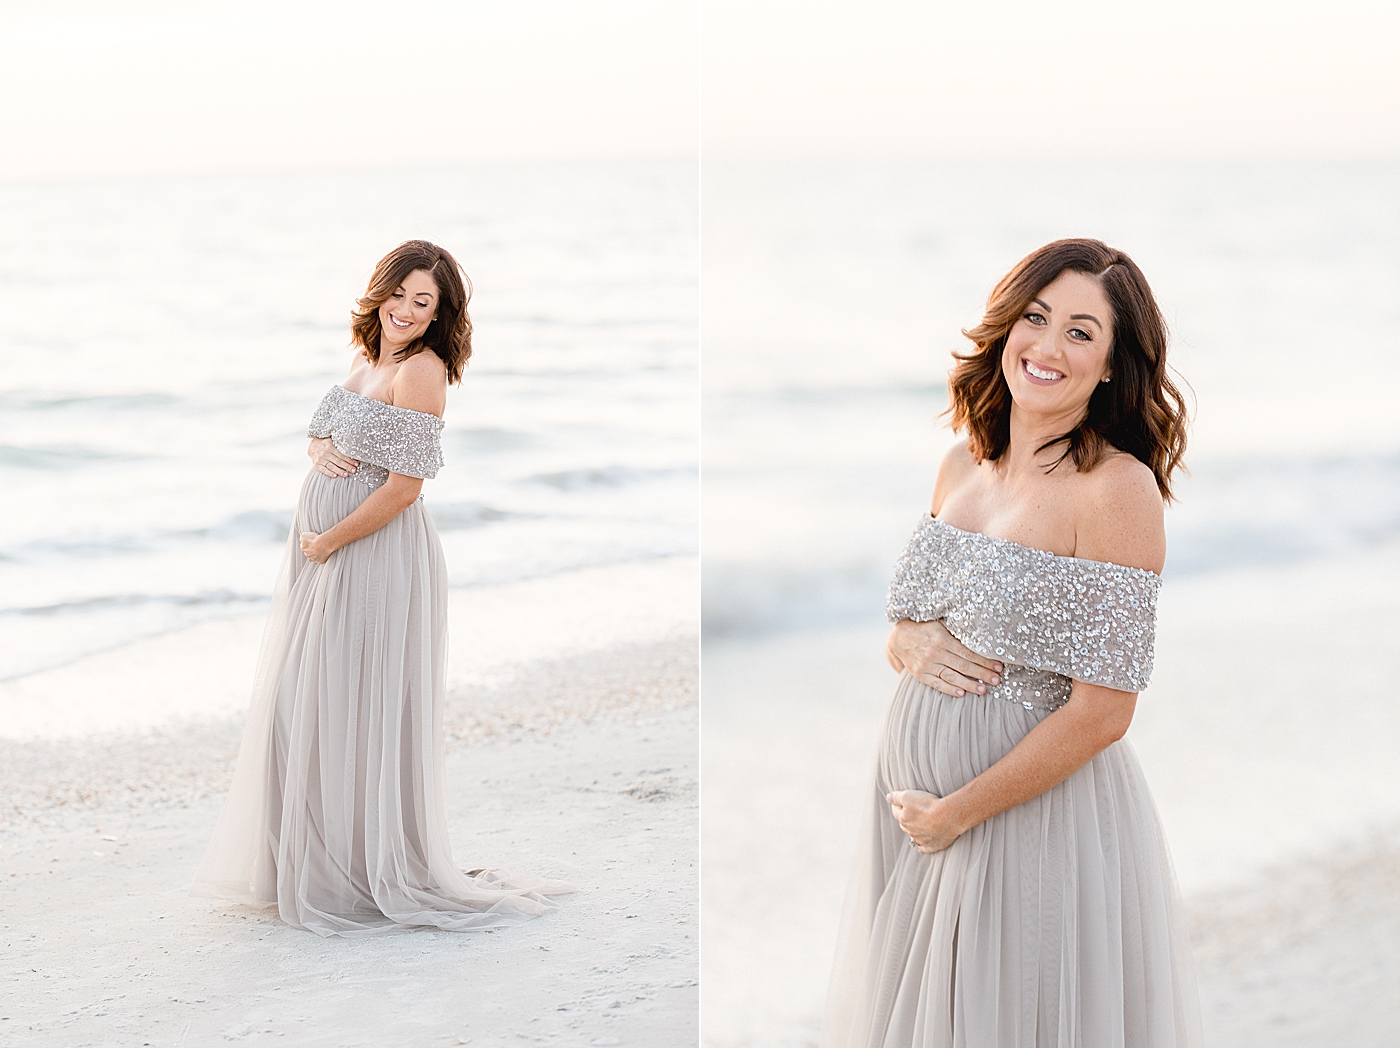 Mom in beaded, tulle dress for maternity photos. Photo by Brittany Elise Photography.